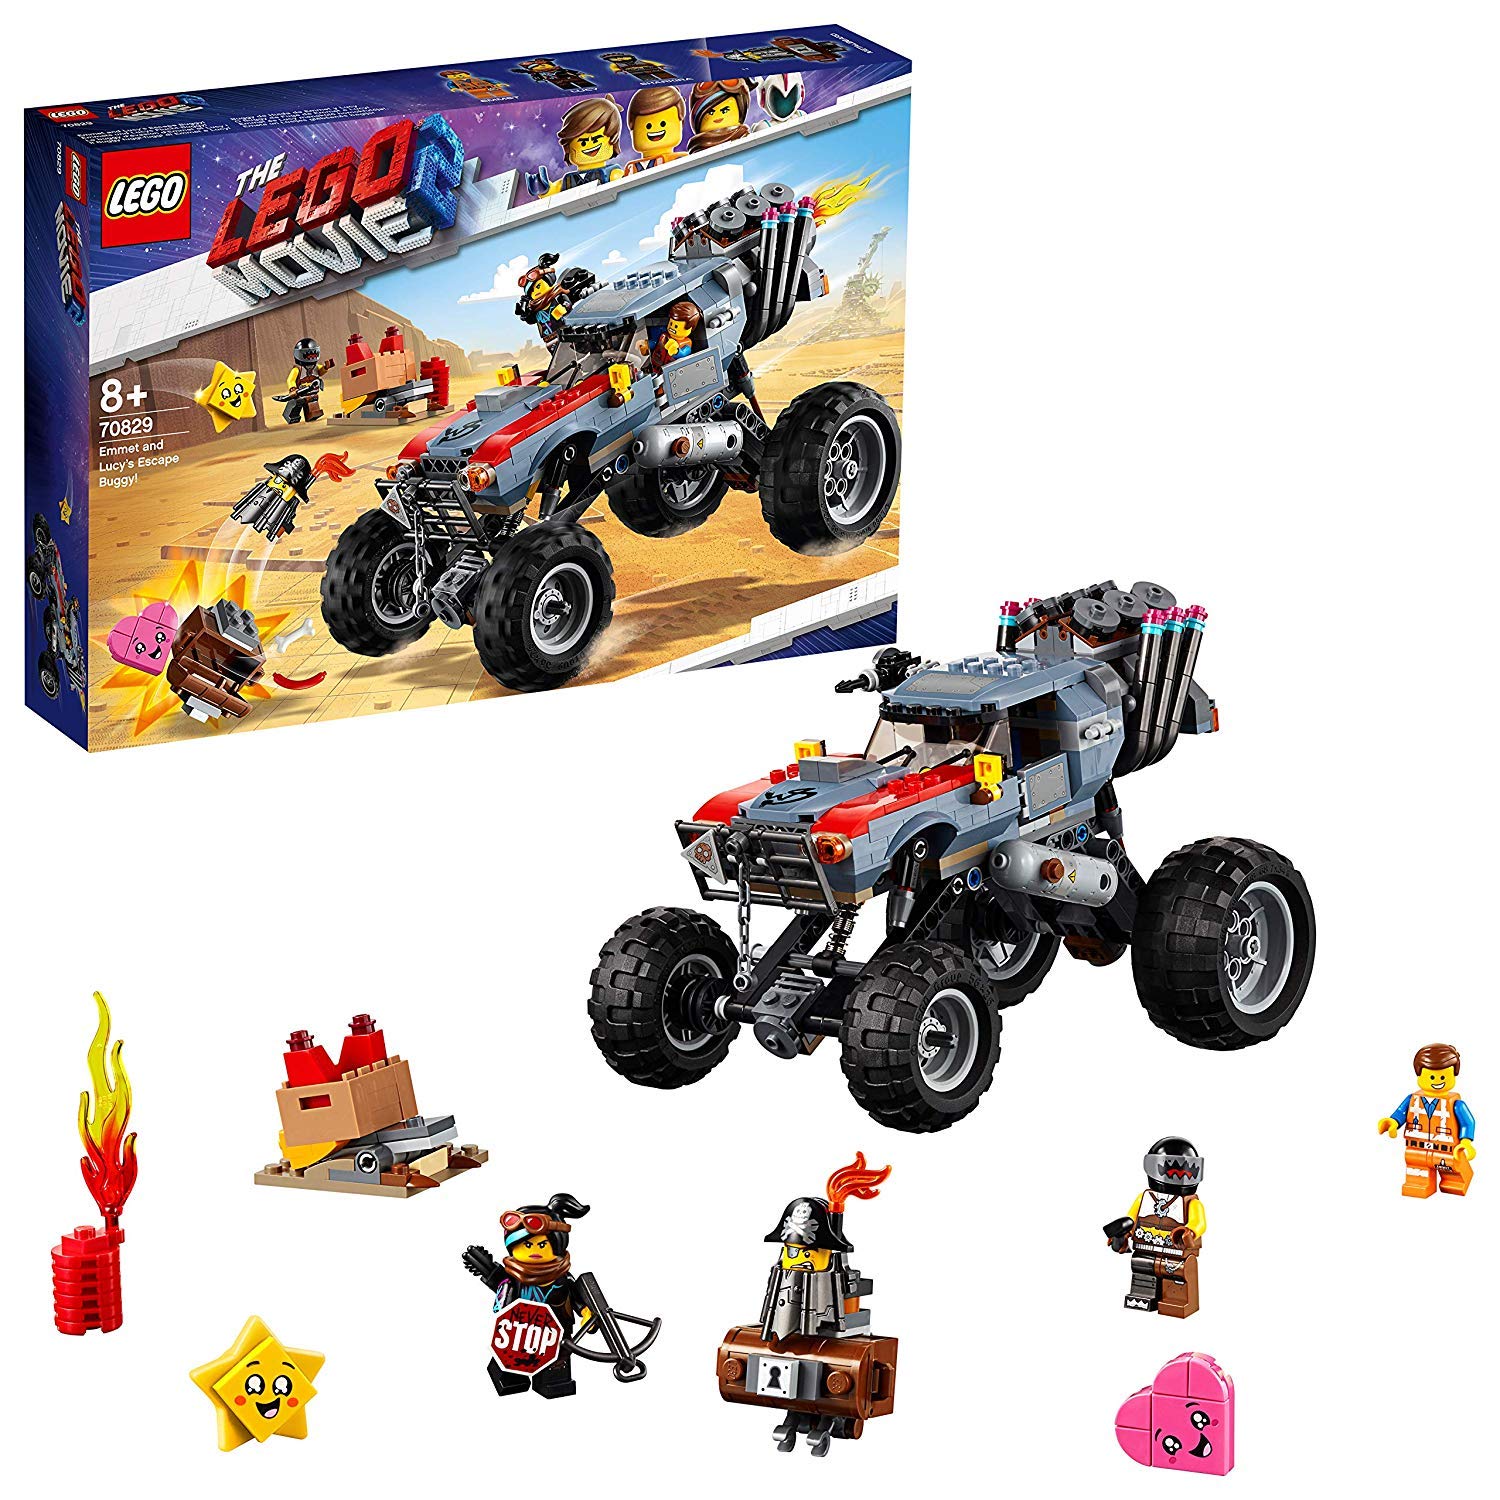 The Lego Movie 2 70829 Emmets And Lucys Escape Buggy